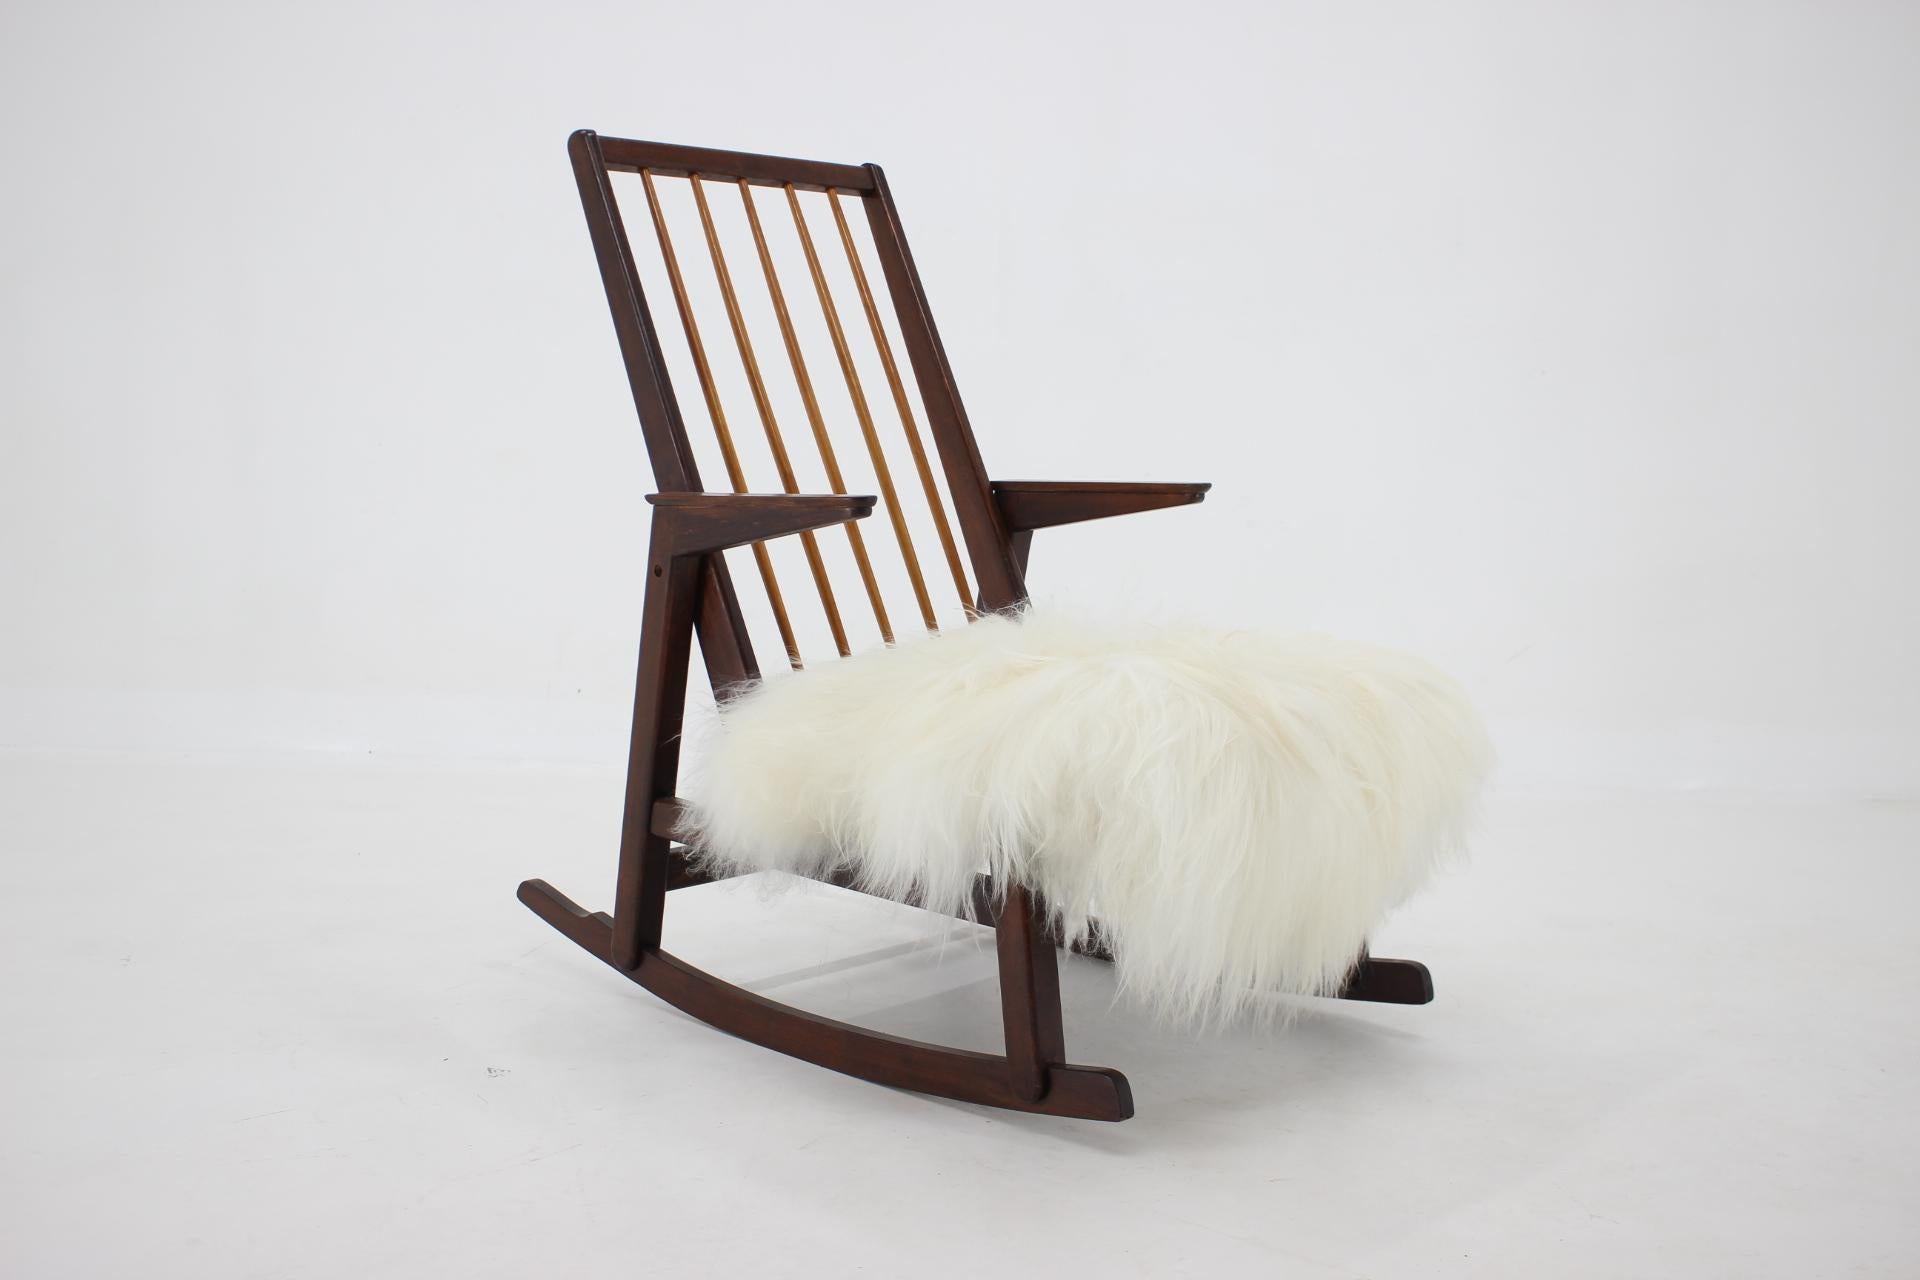 - Made of beech and mahogany wood 
- Carefully refurbished 
- The sheepskin is included
- High of seat 41 cm.